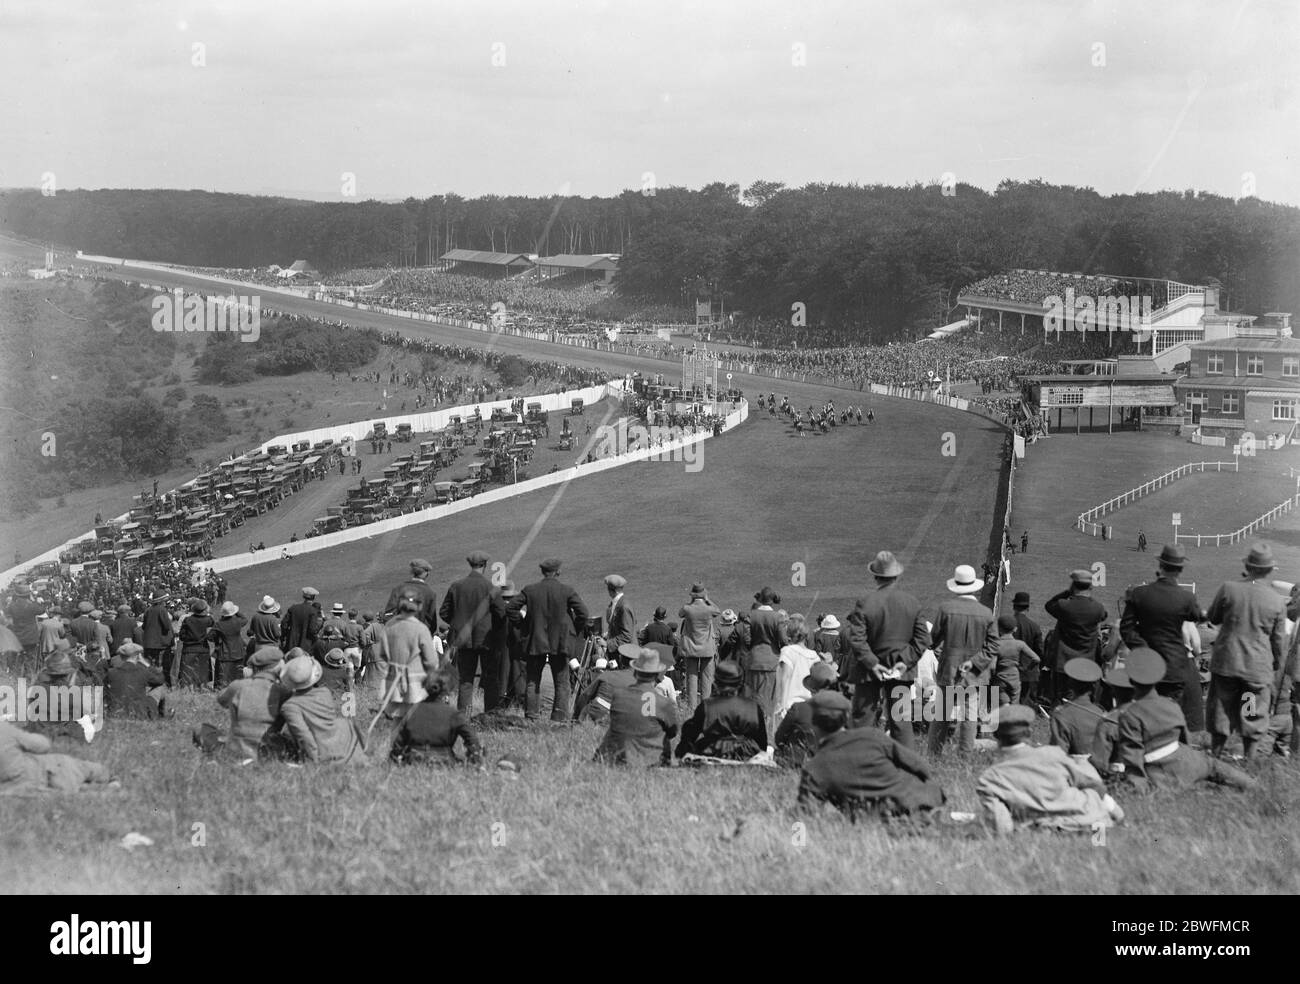 Goodwood races . A striking general view of the course , stands and enclosure during the finish of a race . 29 July 1924 Stock Photo